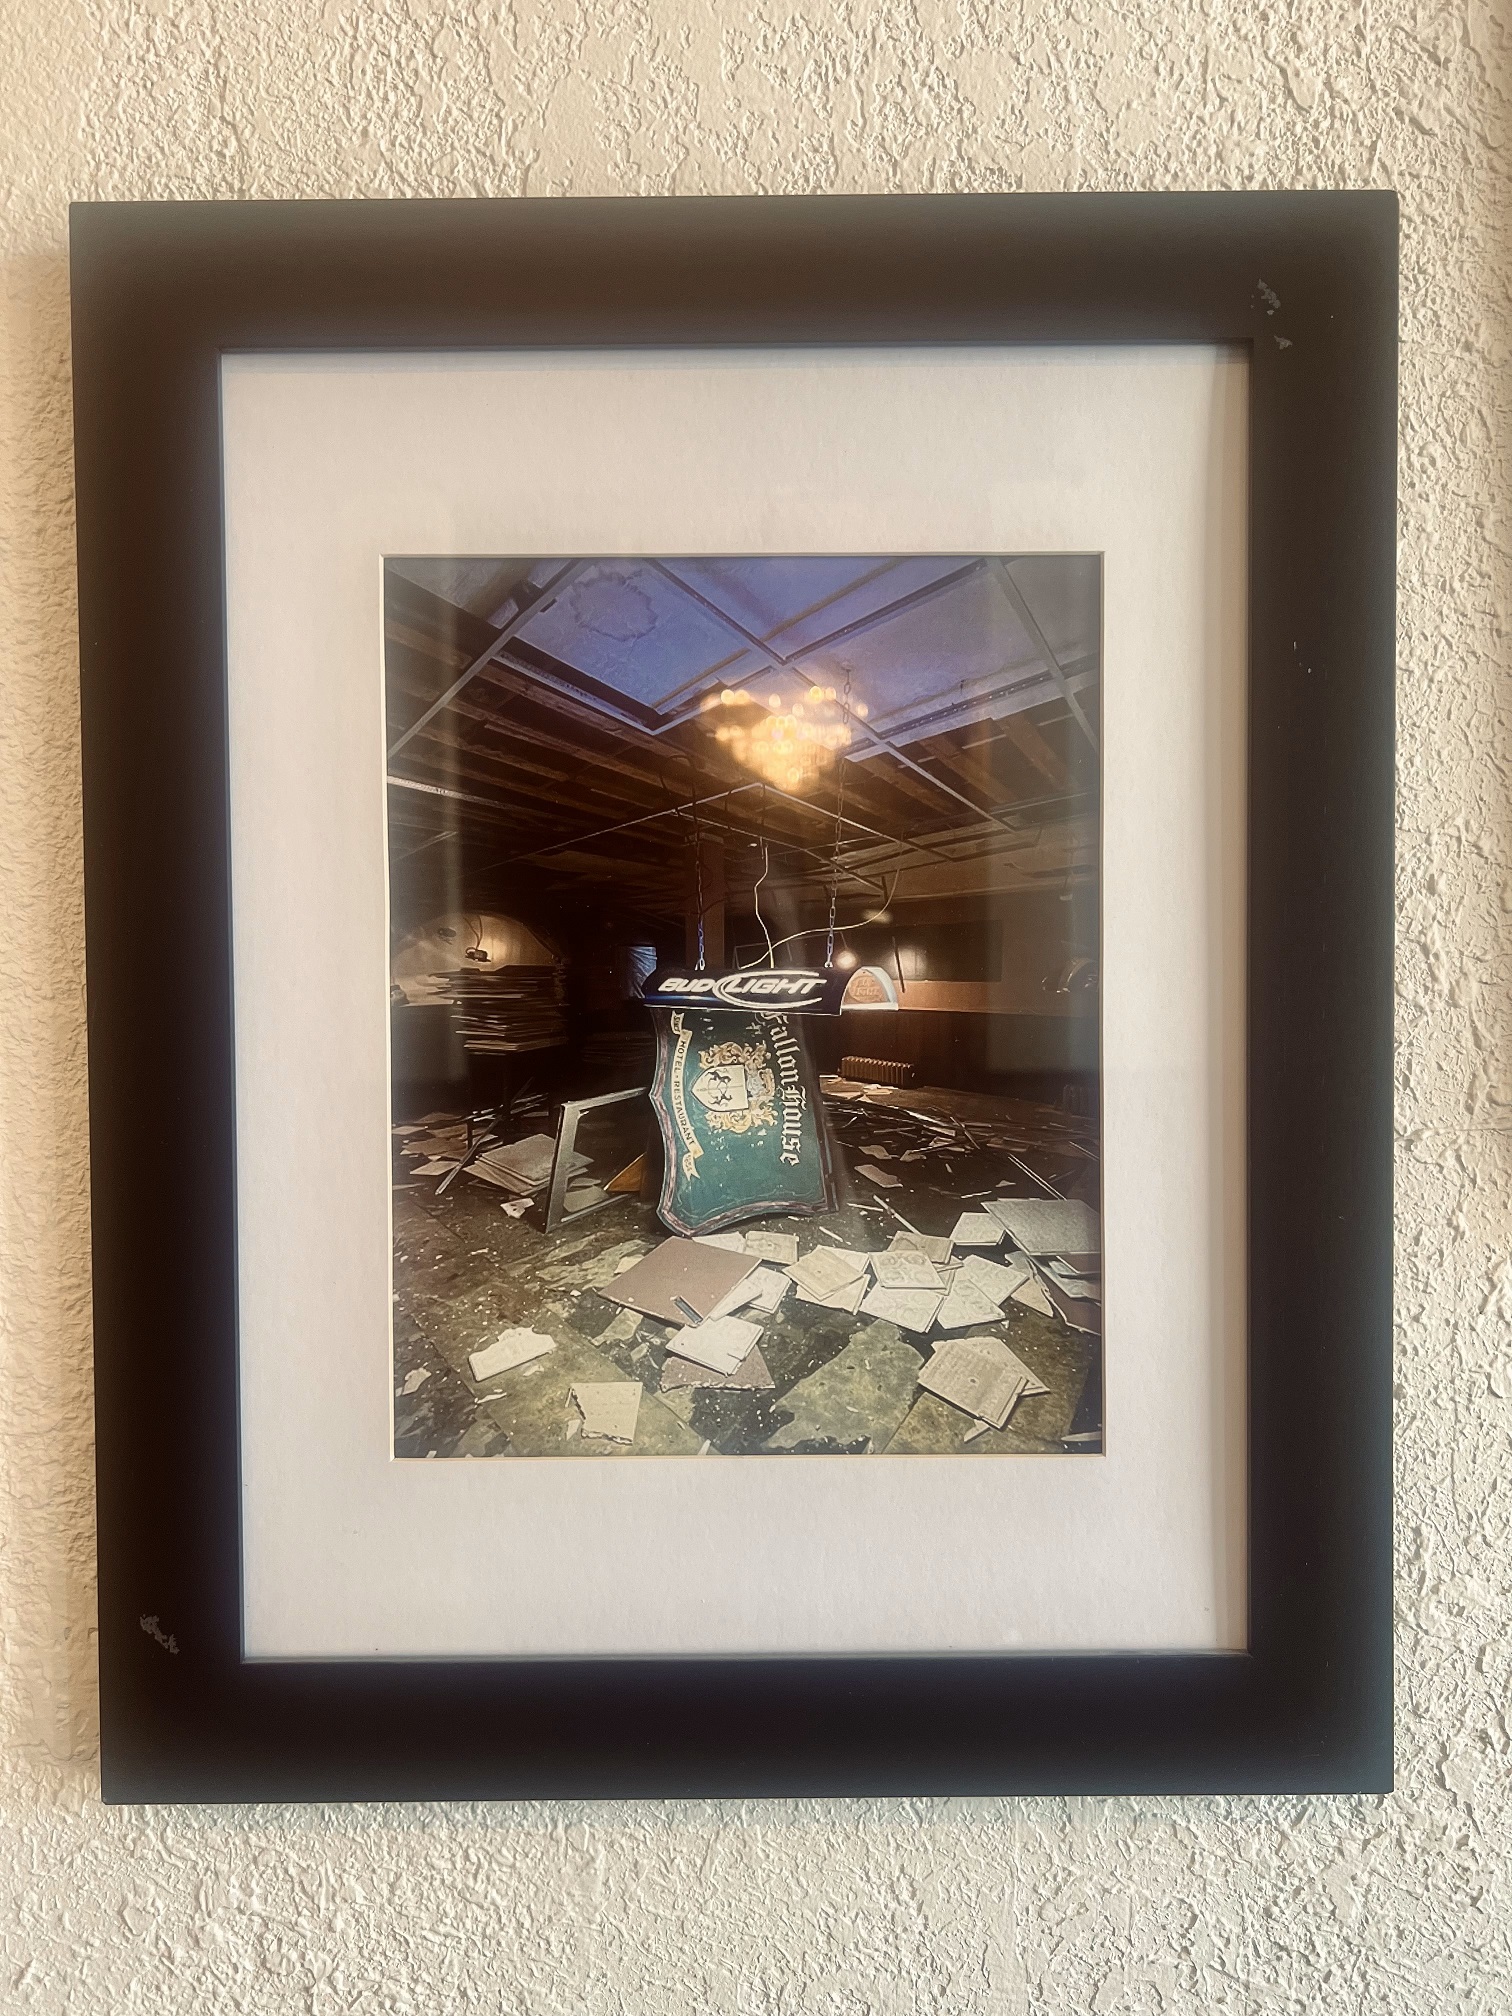 Framed photograph of a room with debris on the floor.